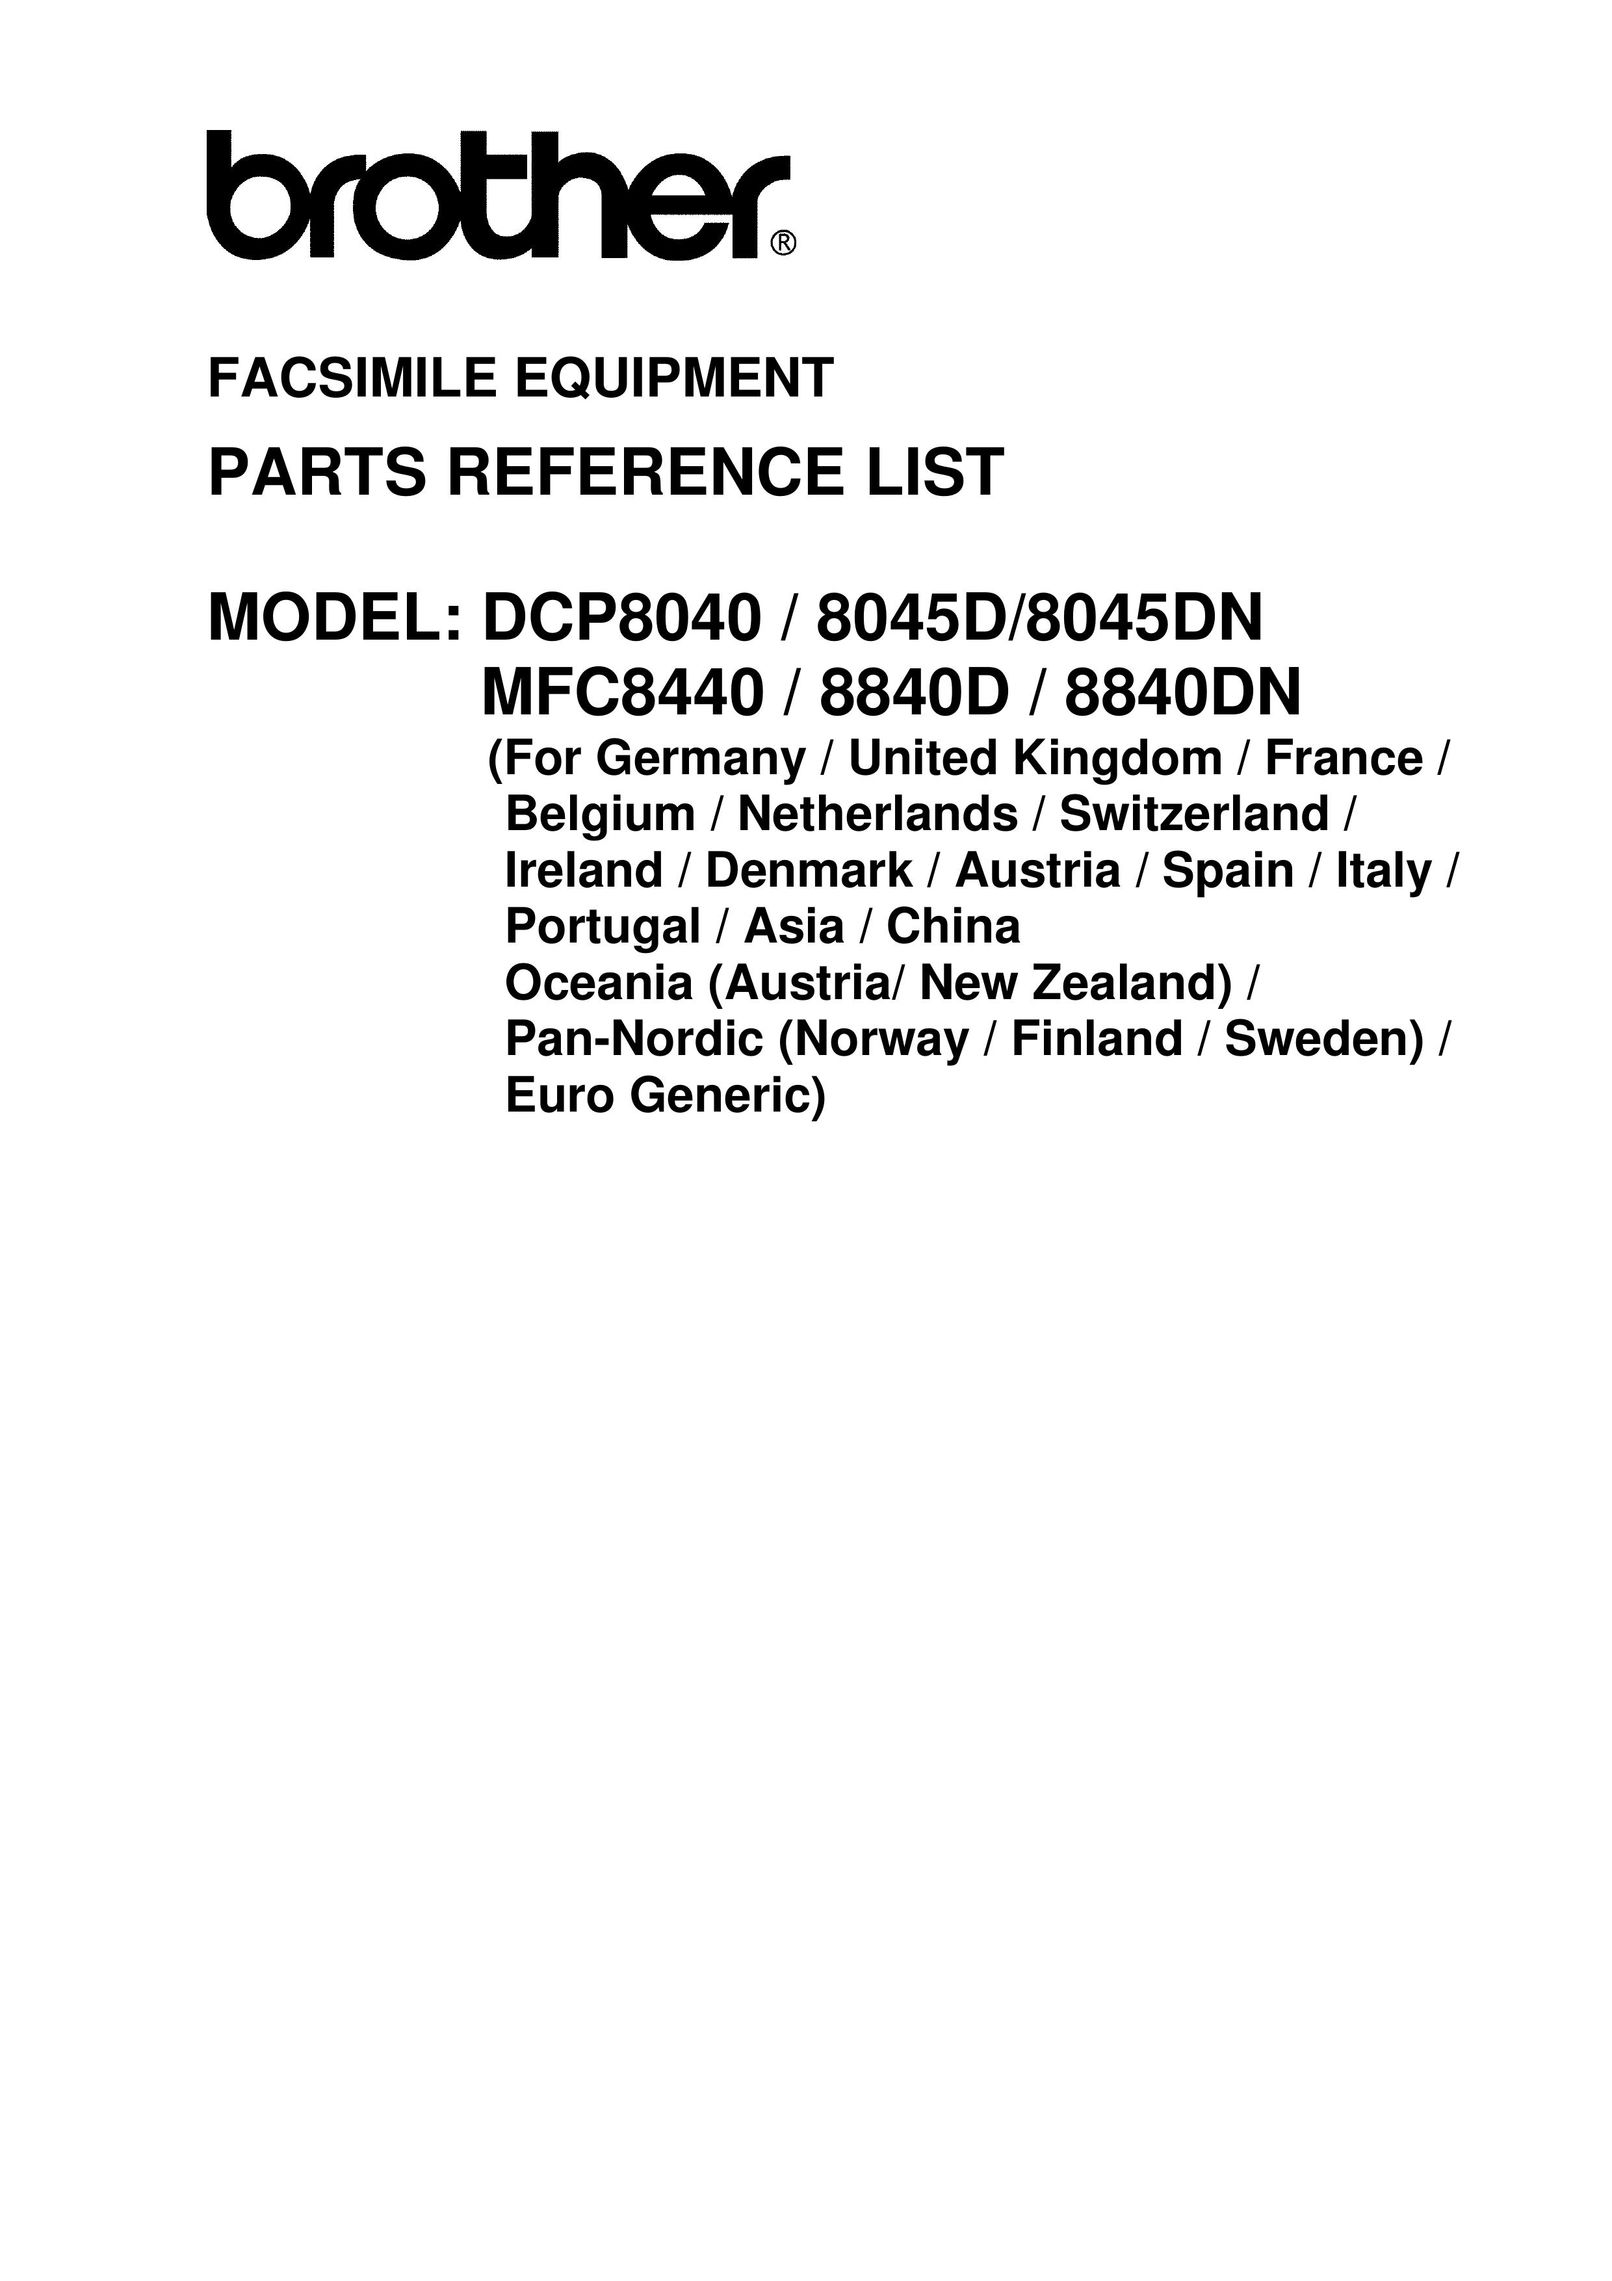 Brother DCP8045D Fax Machine User Manual